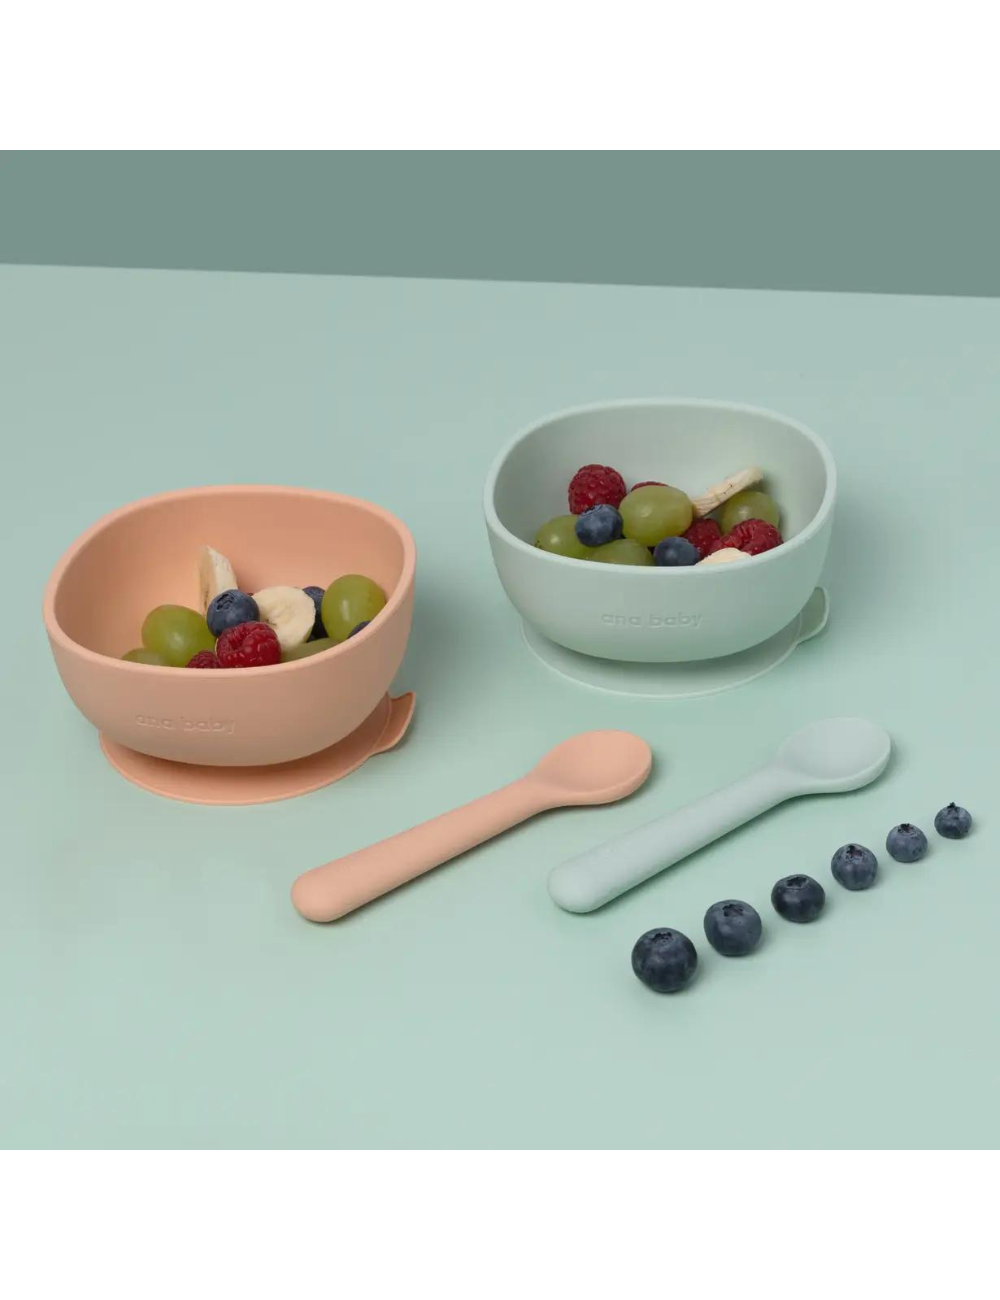 2 Pack Silicone Suction Bowl and Spoon in Kraft Paper Box